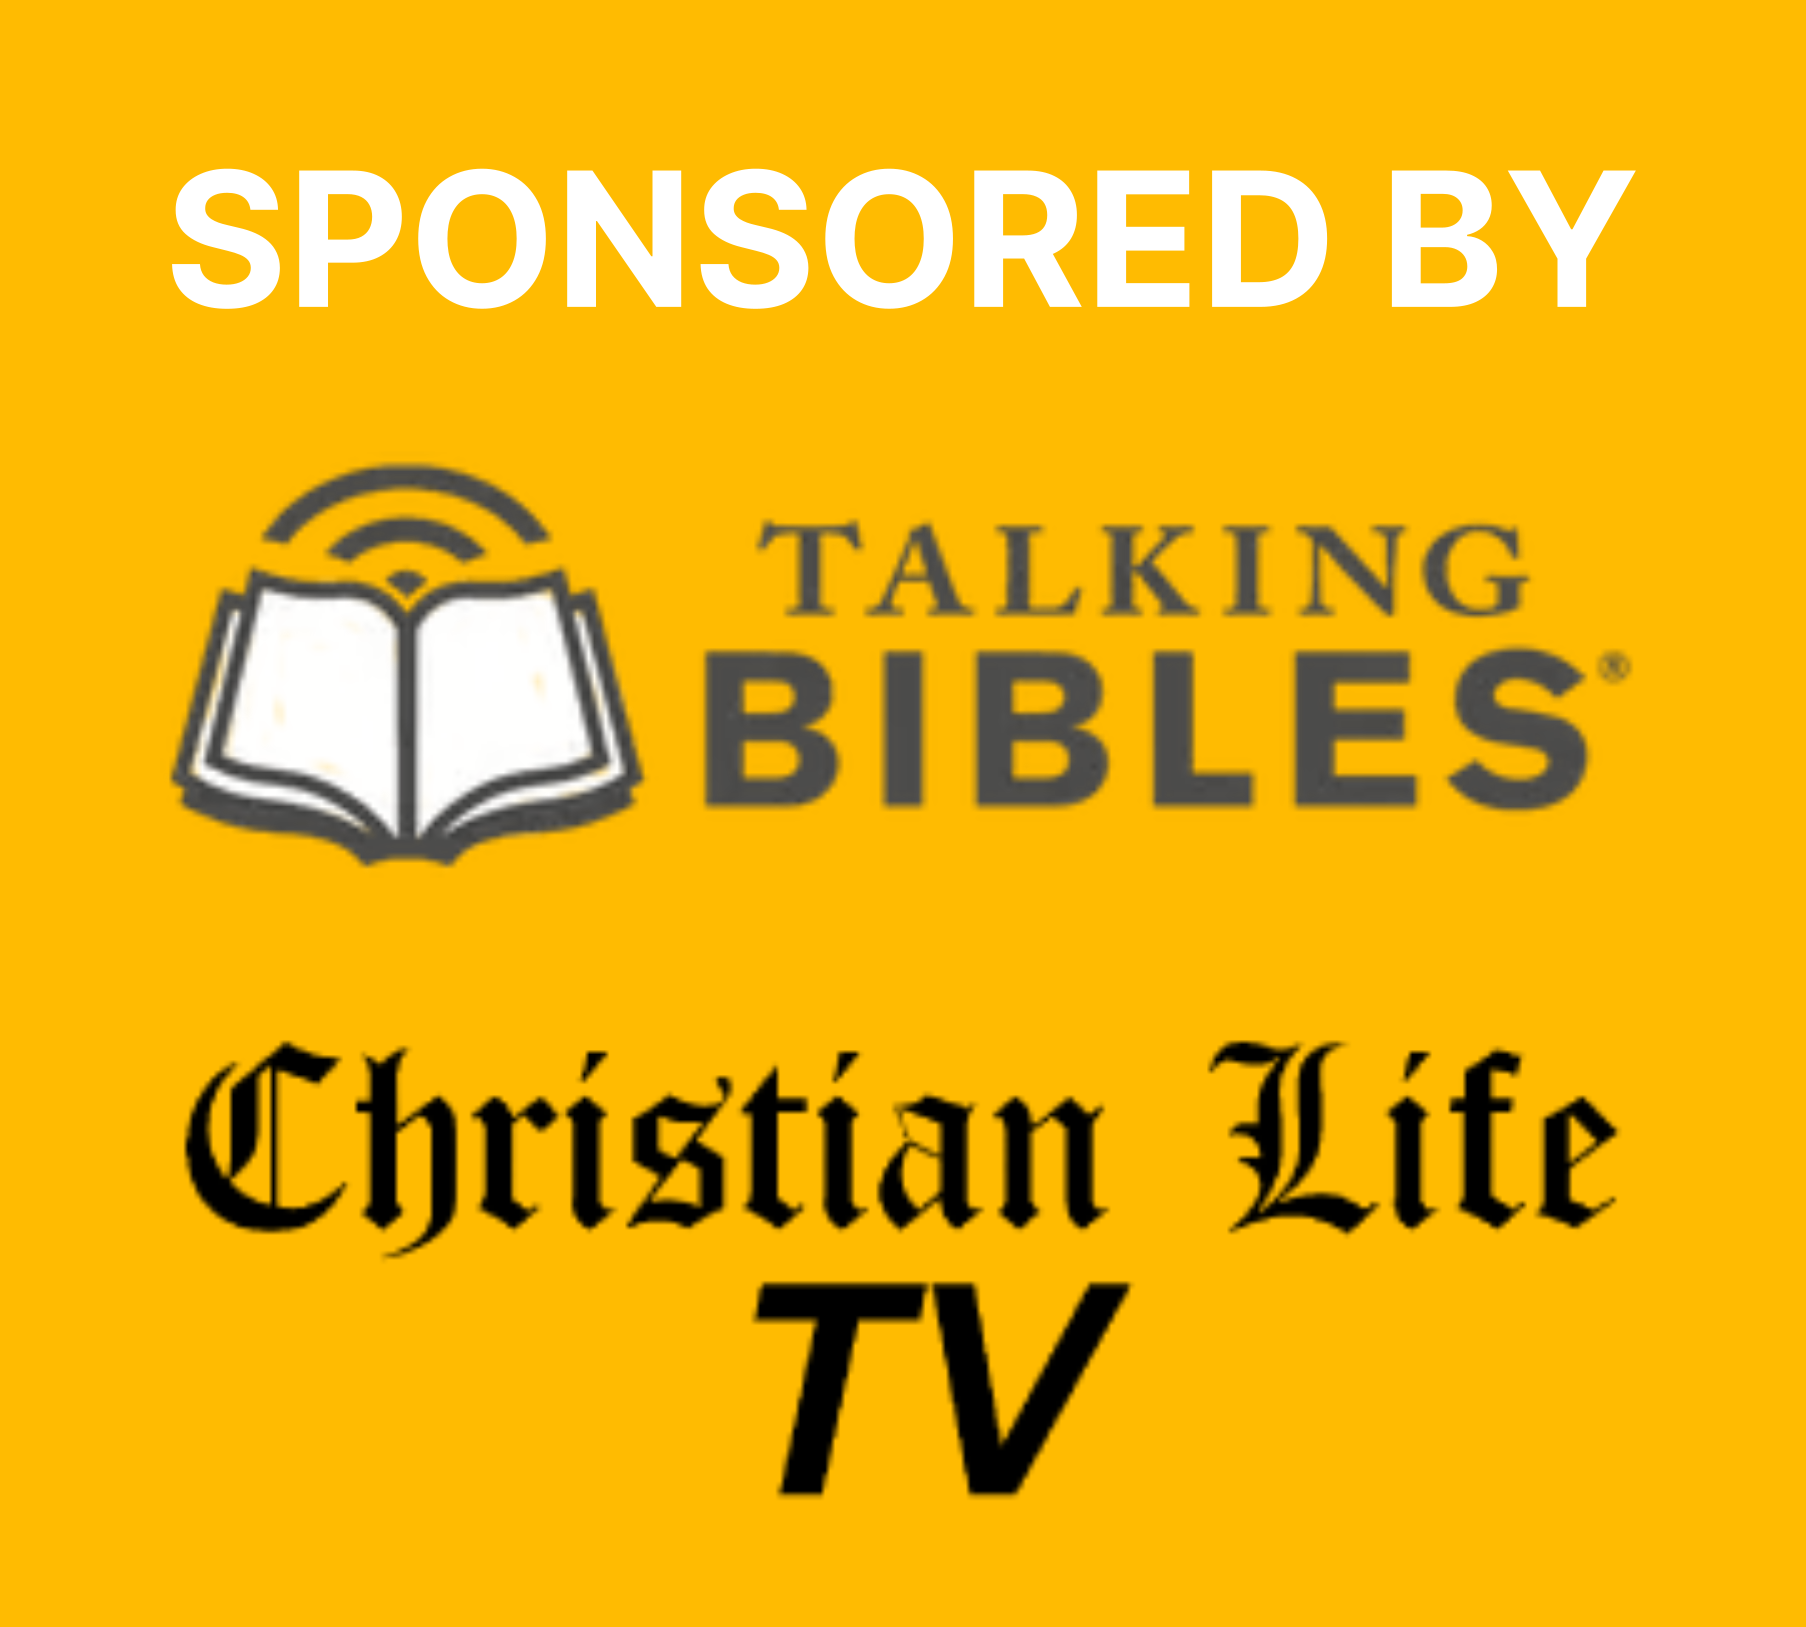 podcast episode sponsored by talking bibles and christian life tv